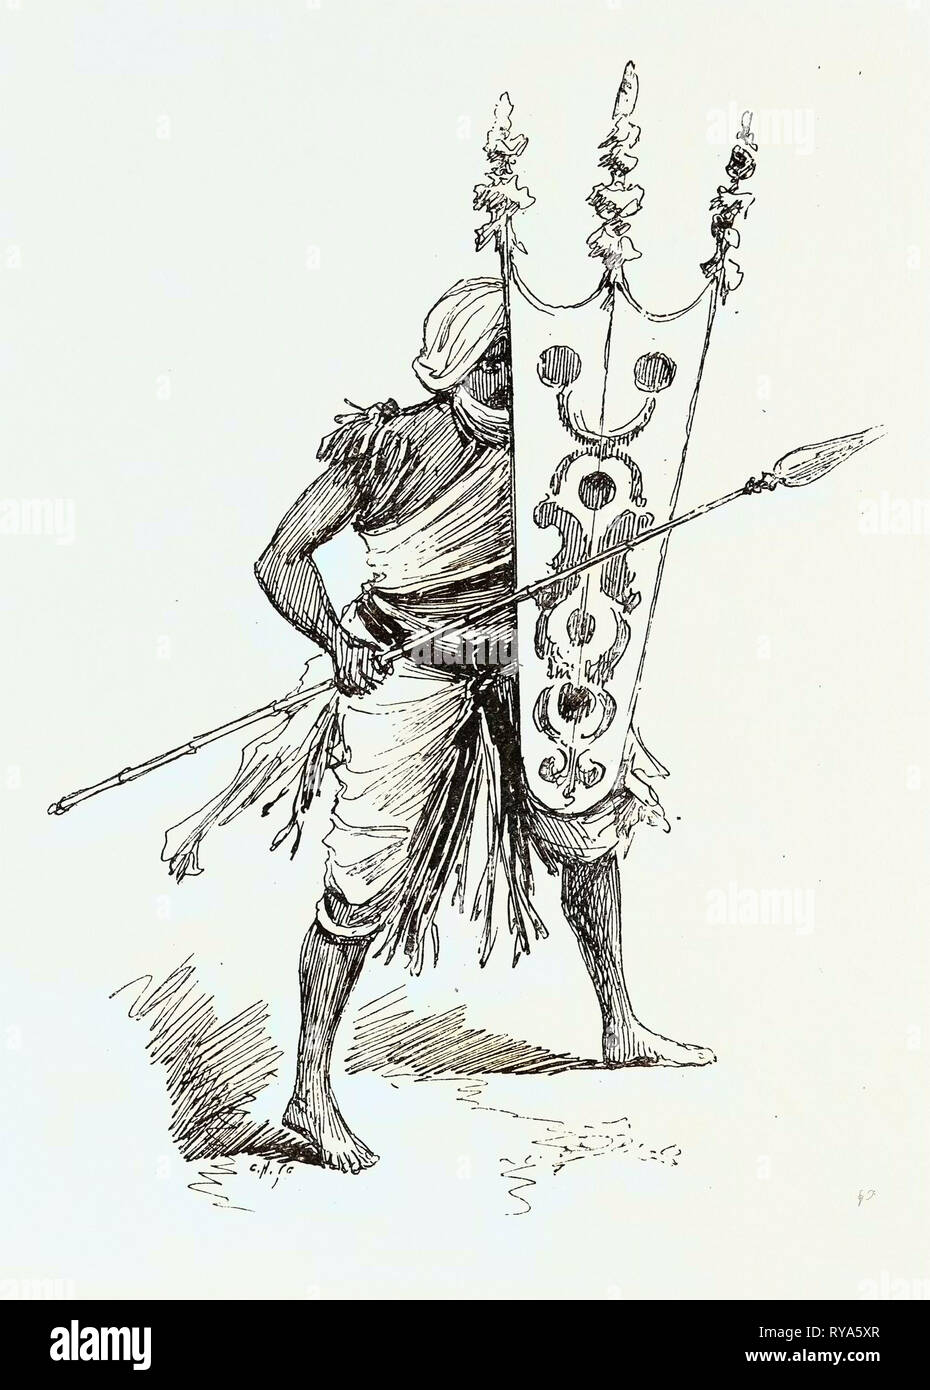 The Military Disaster in Manipore on the Southern Frontier of Assam British Indian Empire: A Manipore Warrior Fighting Stock Photo